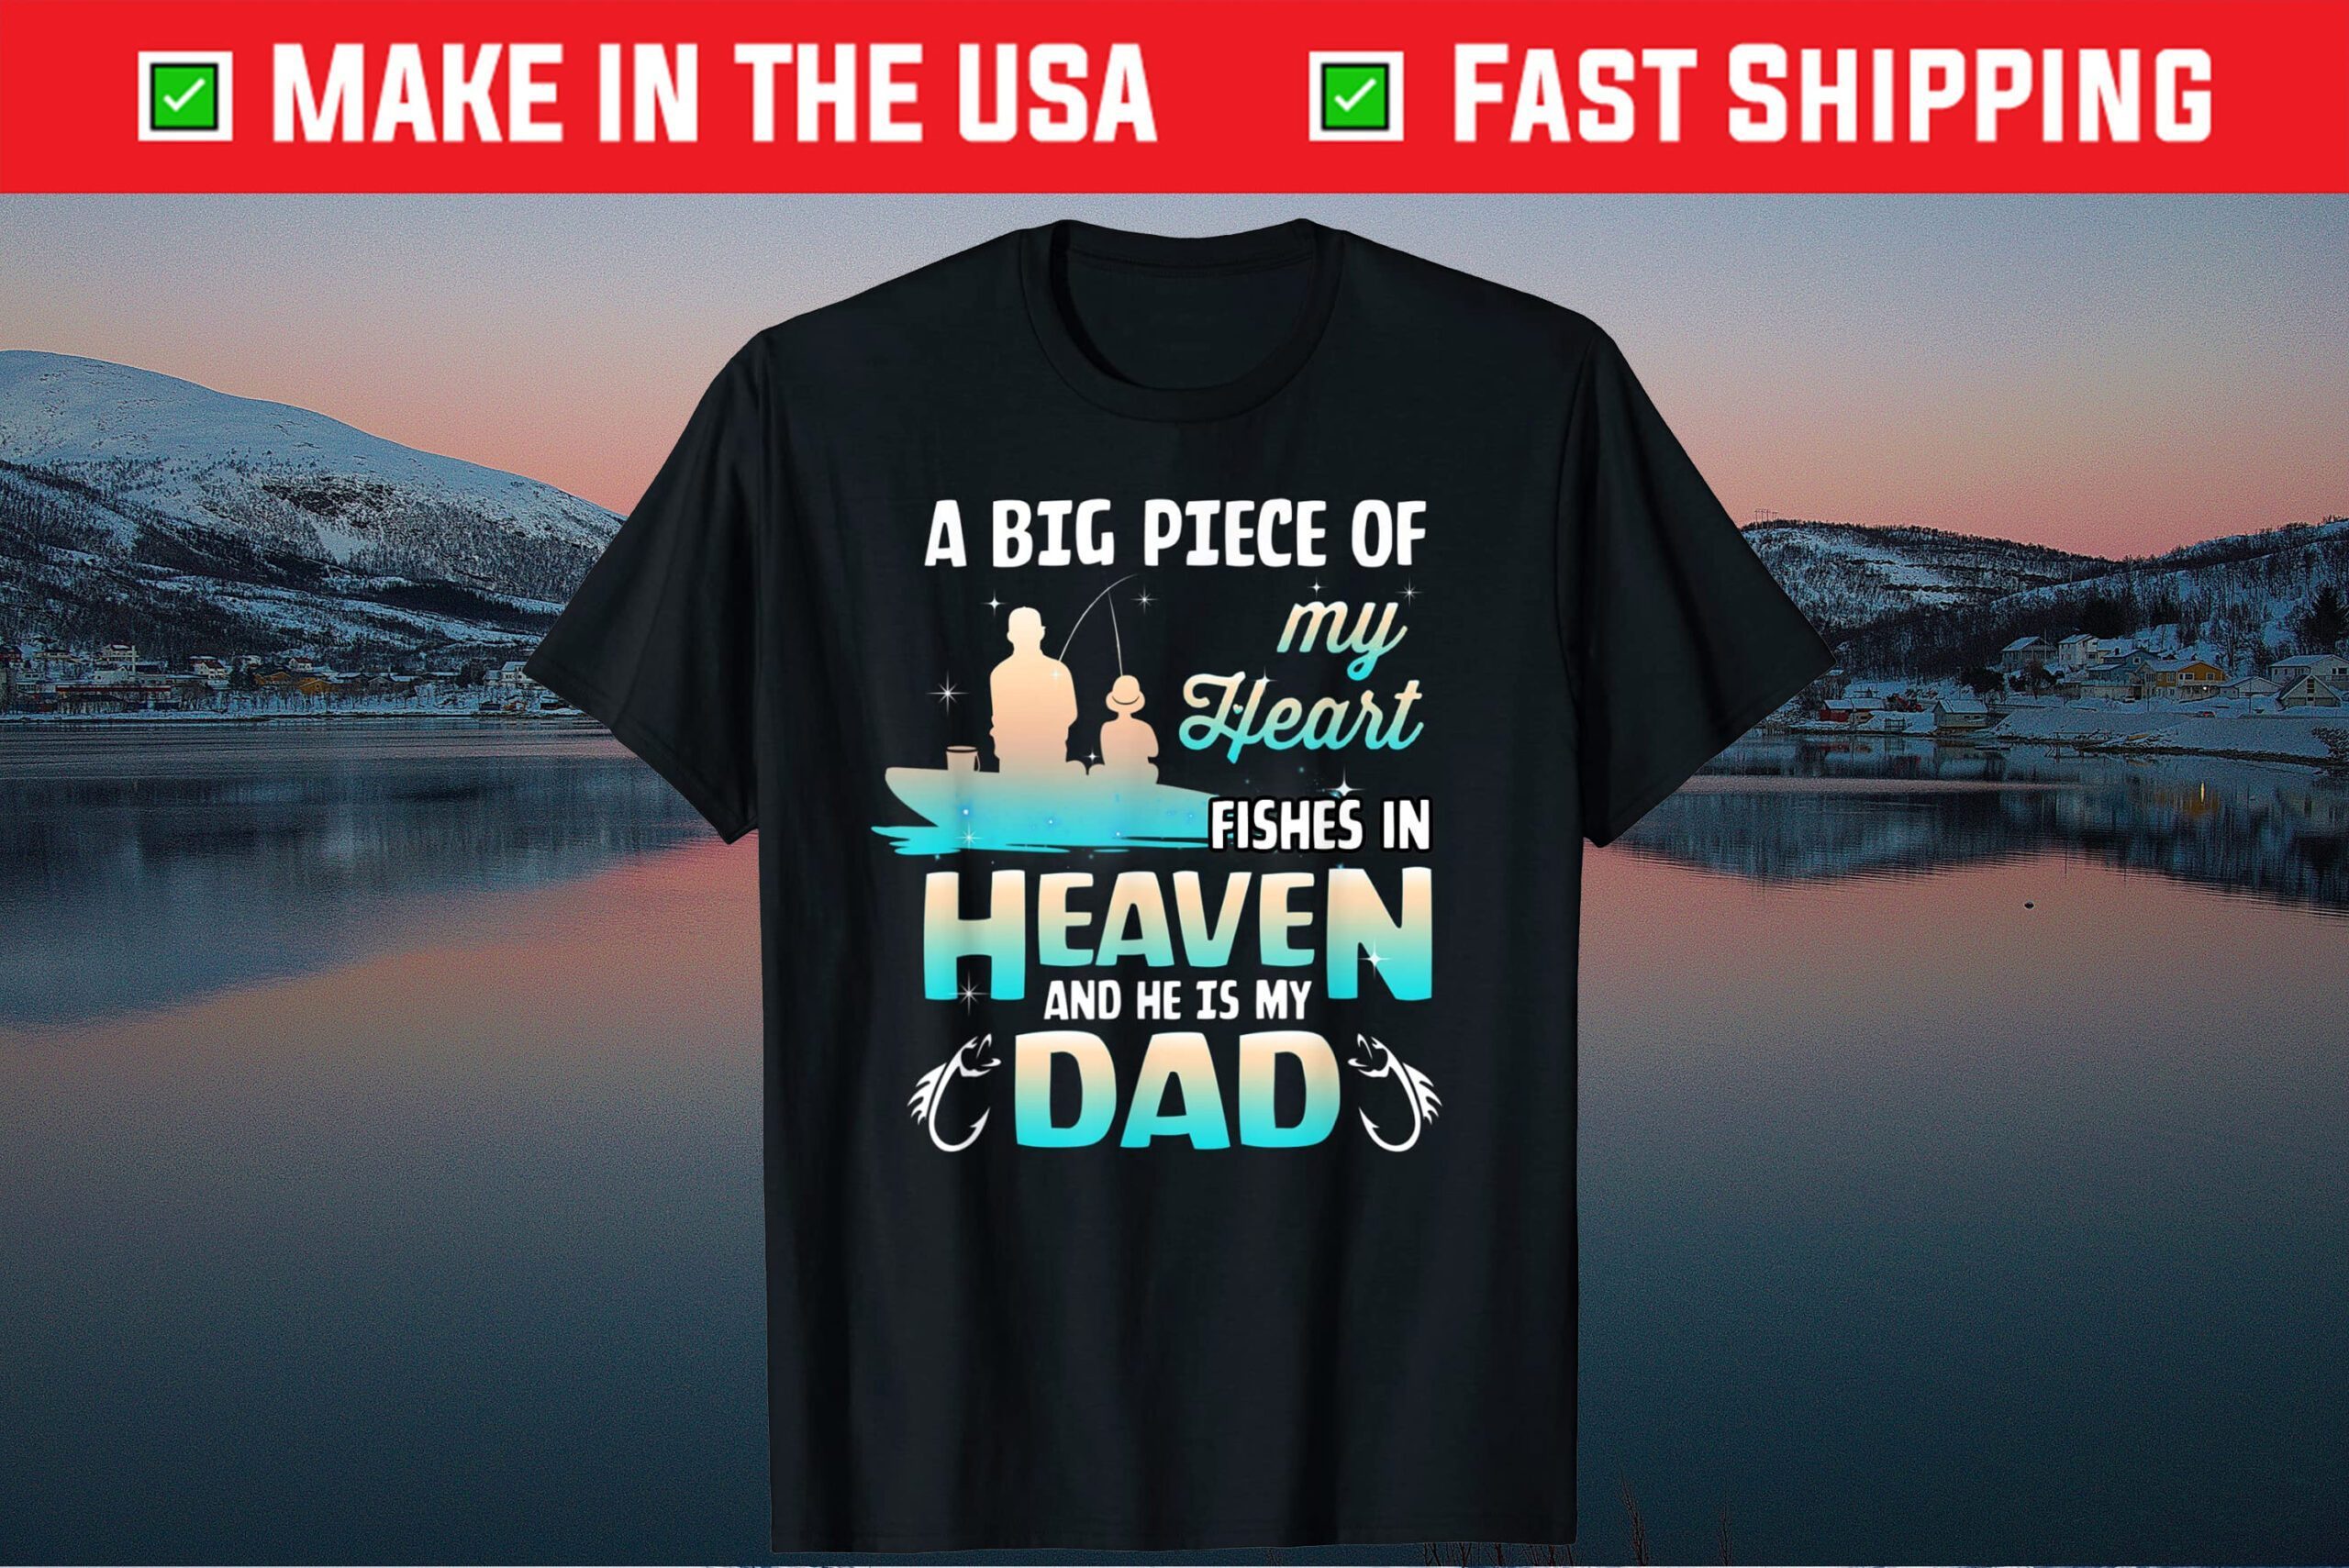 My Dad Fishes In Heaven Fishing Memorial Shirt - Image & Video